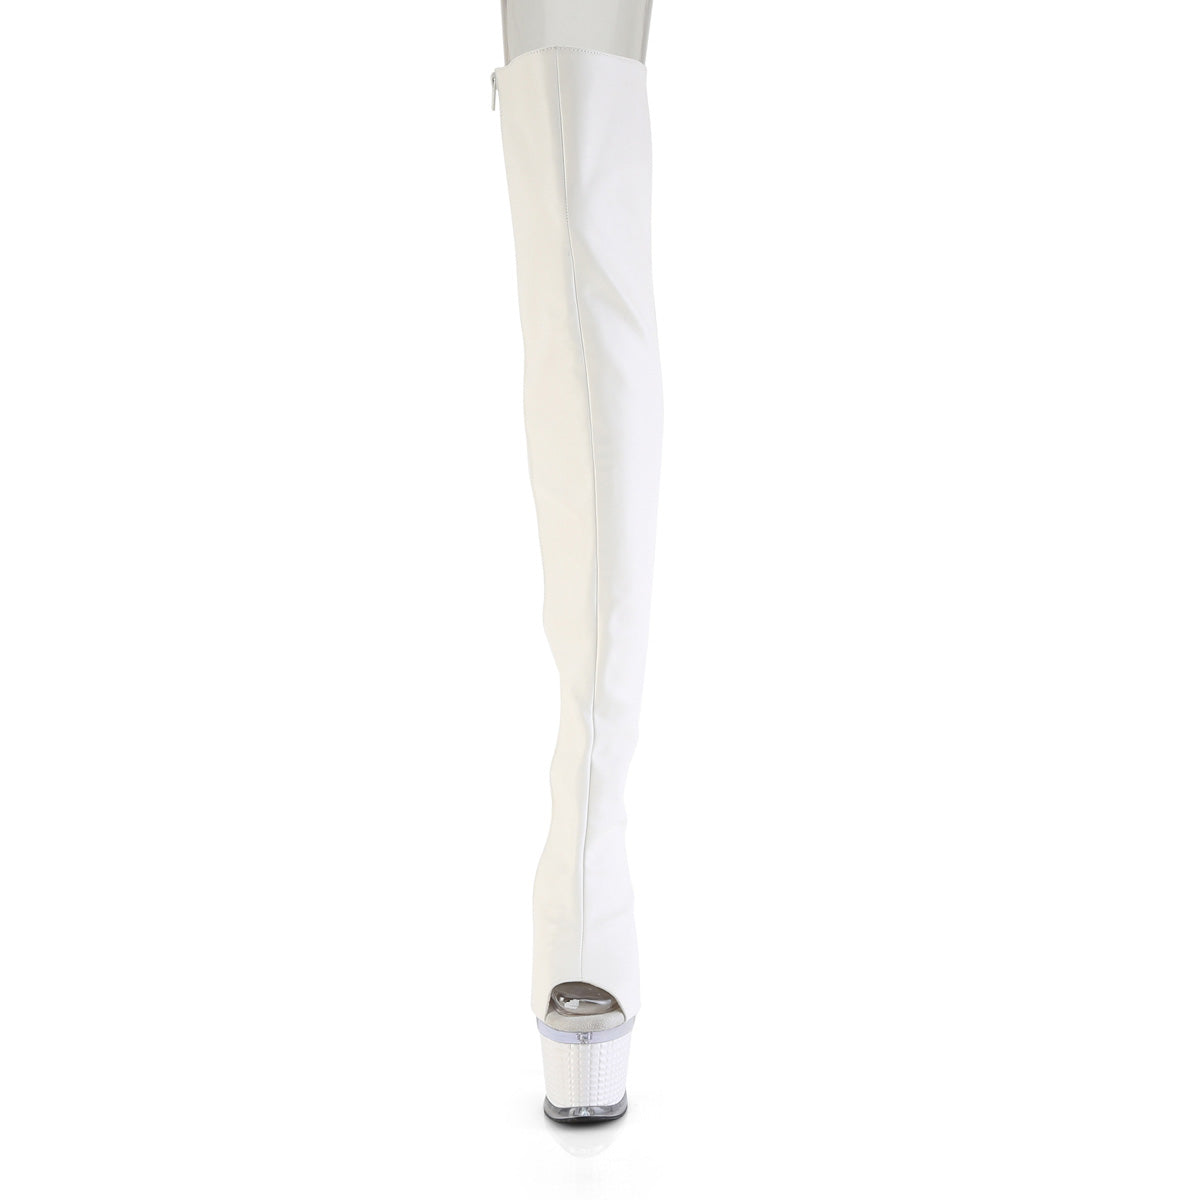 SPECTATOR-3030 Pleaser Pole Dancing Thigh High Boots with Peep Toes